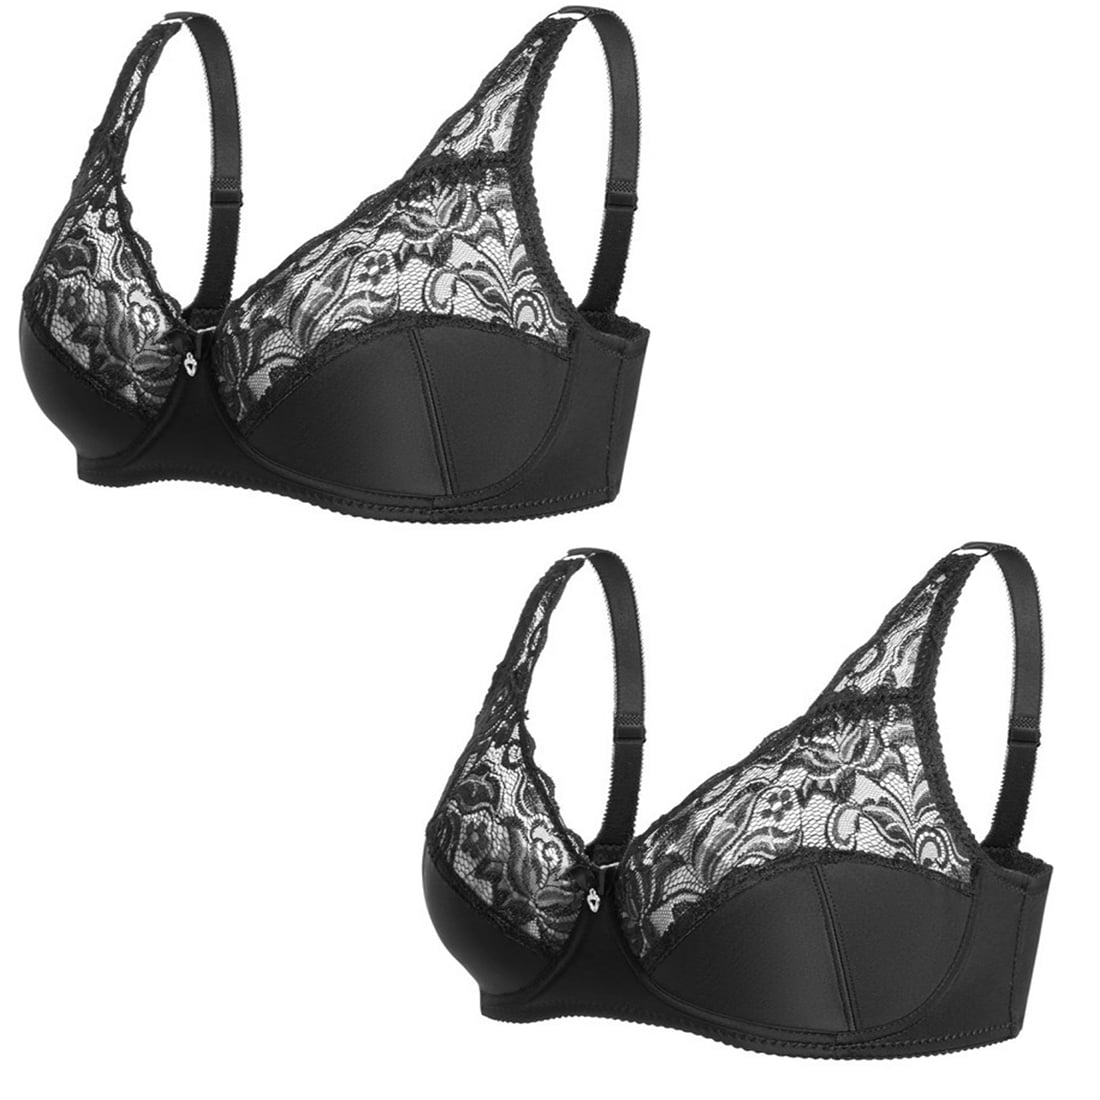 Bras for Big Breast Women High Support Large Bust - Adjustable Bralette  Bra,Wireless Everyday Bras for Women,Non-Padded Plus Size Push up  Bra(4-Packs)